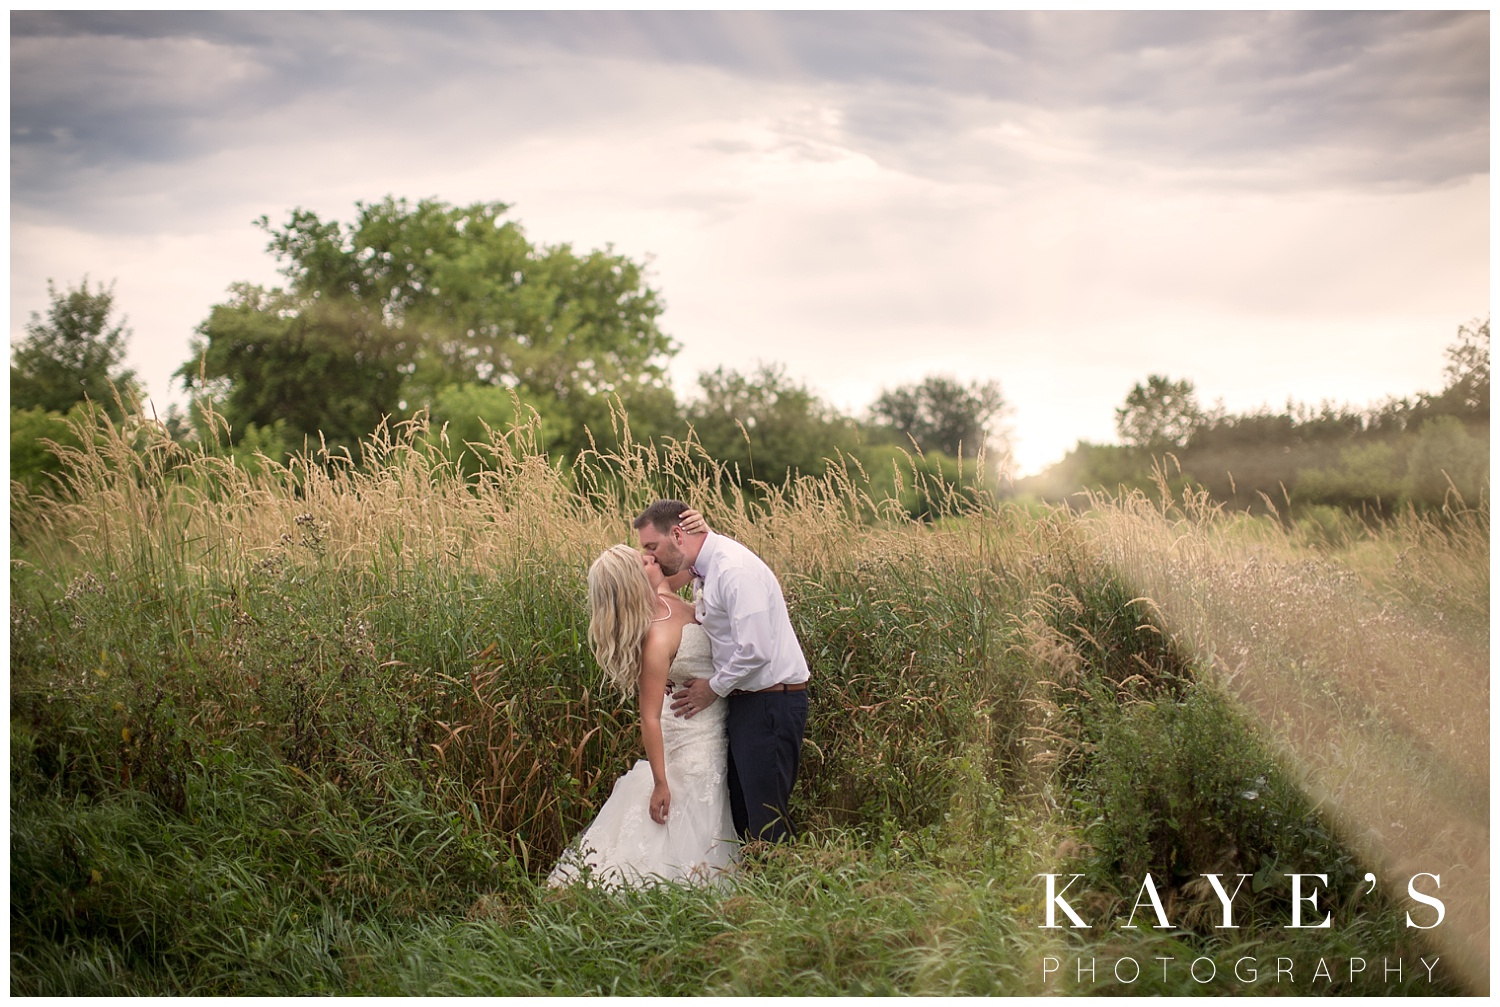 wedding photo at sunset in a field during backyard wedding in grand blanc michigan